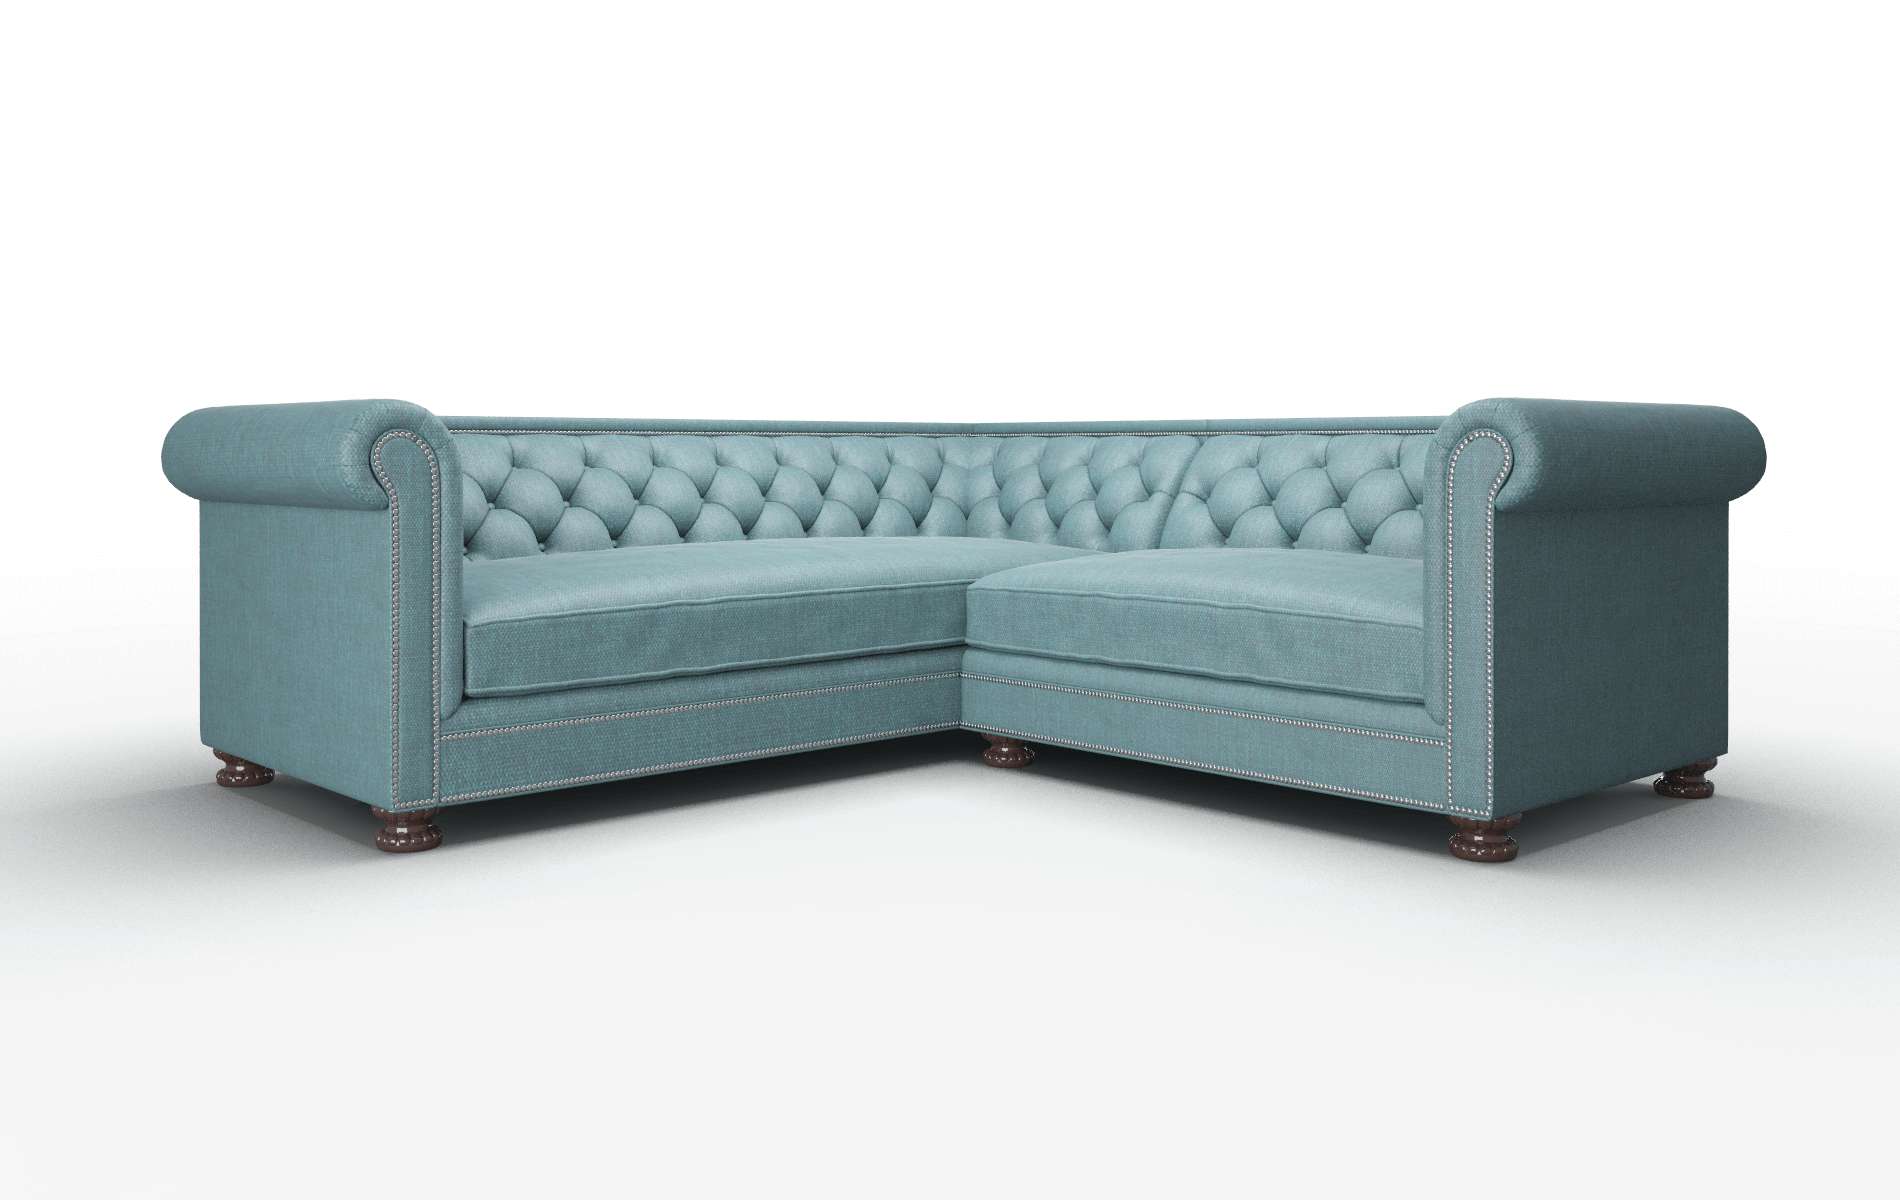 Athens Rocket Peacock Sectional espresso legs 1